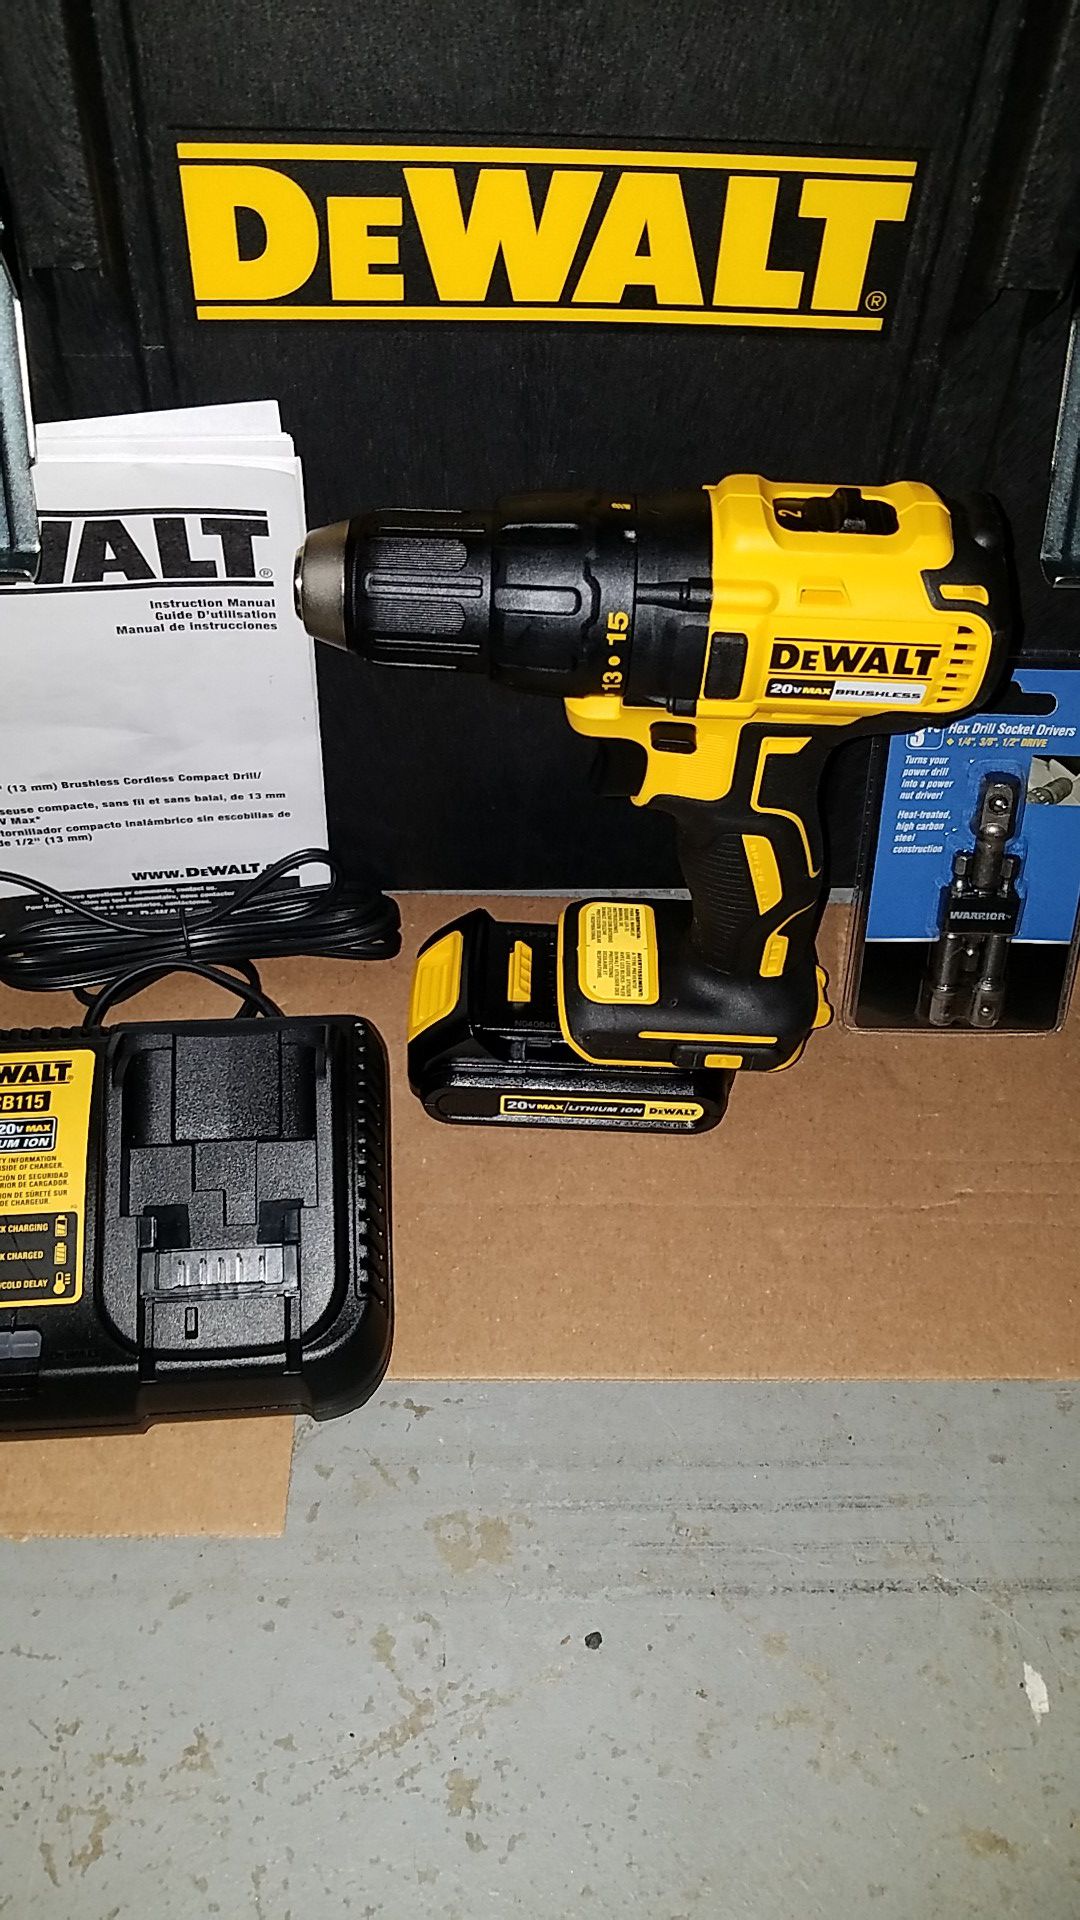 New dewalt 20v MAX Brushless drill/driver with battery and charger